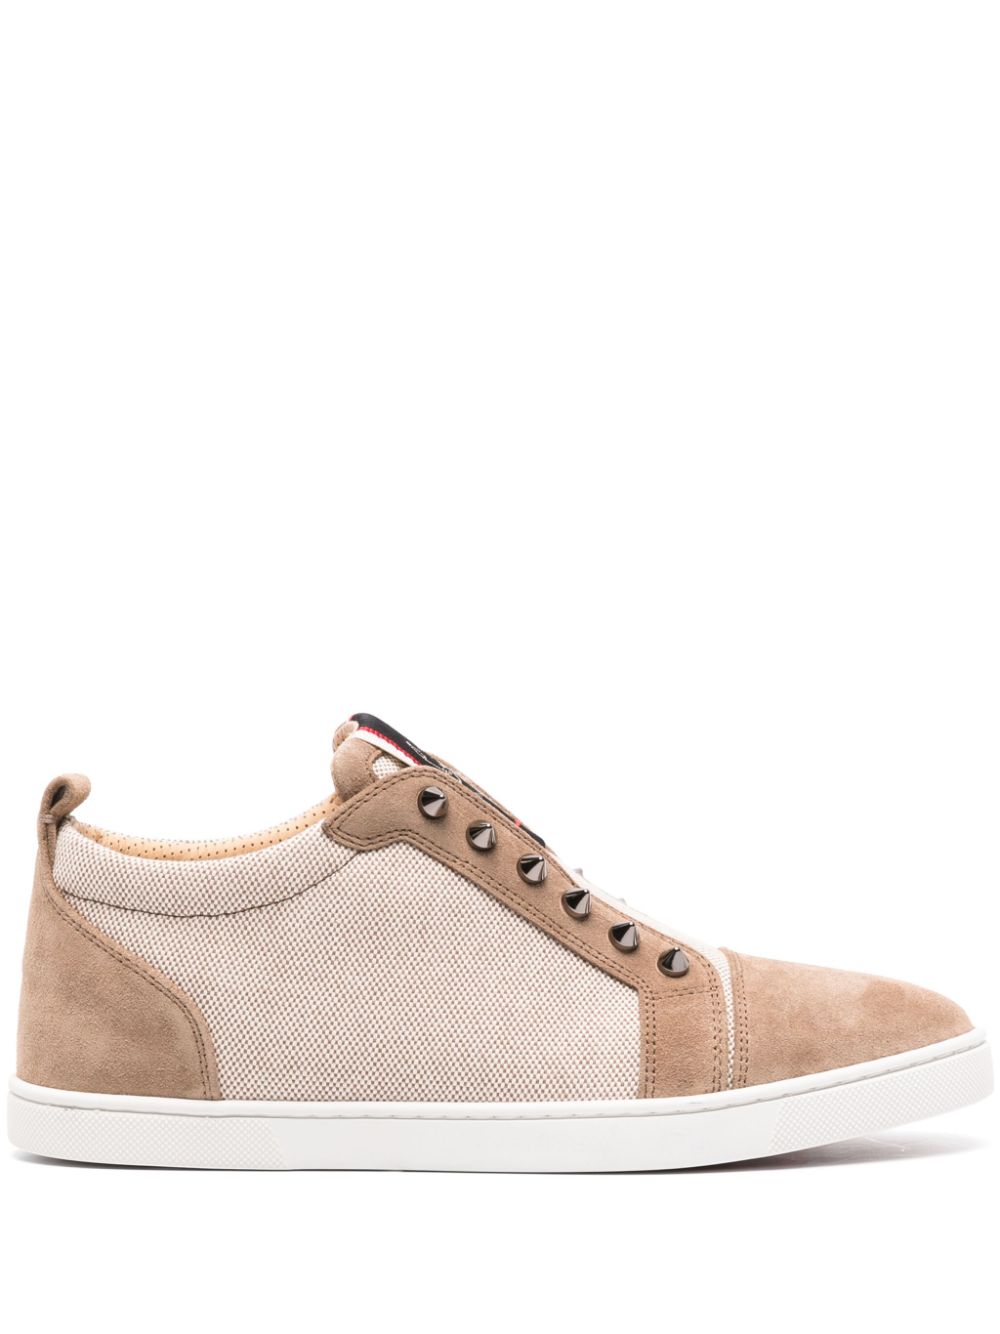 Brown Low-Top Sneakers for Men, with Spike Stud Detailing and Logo Patch